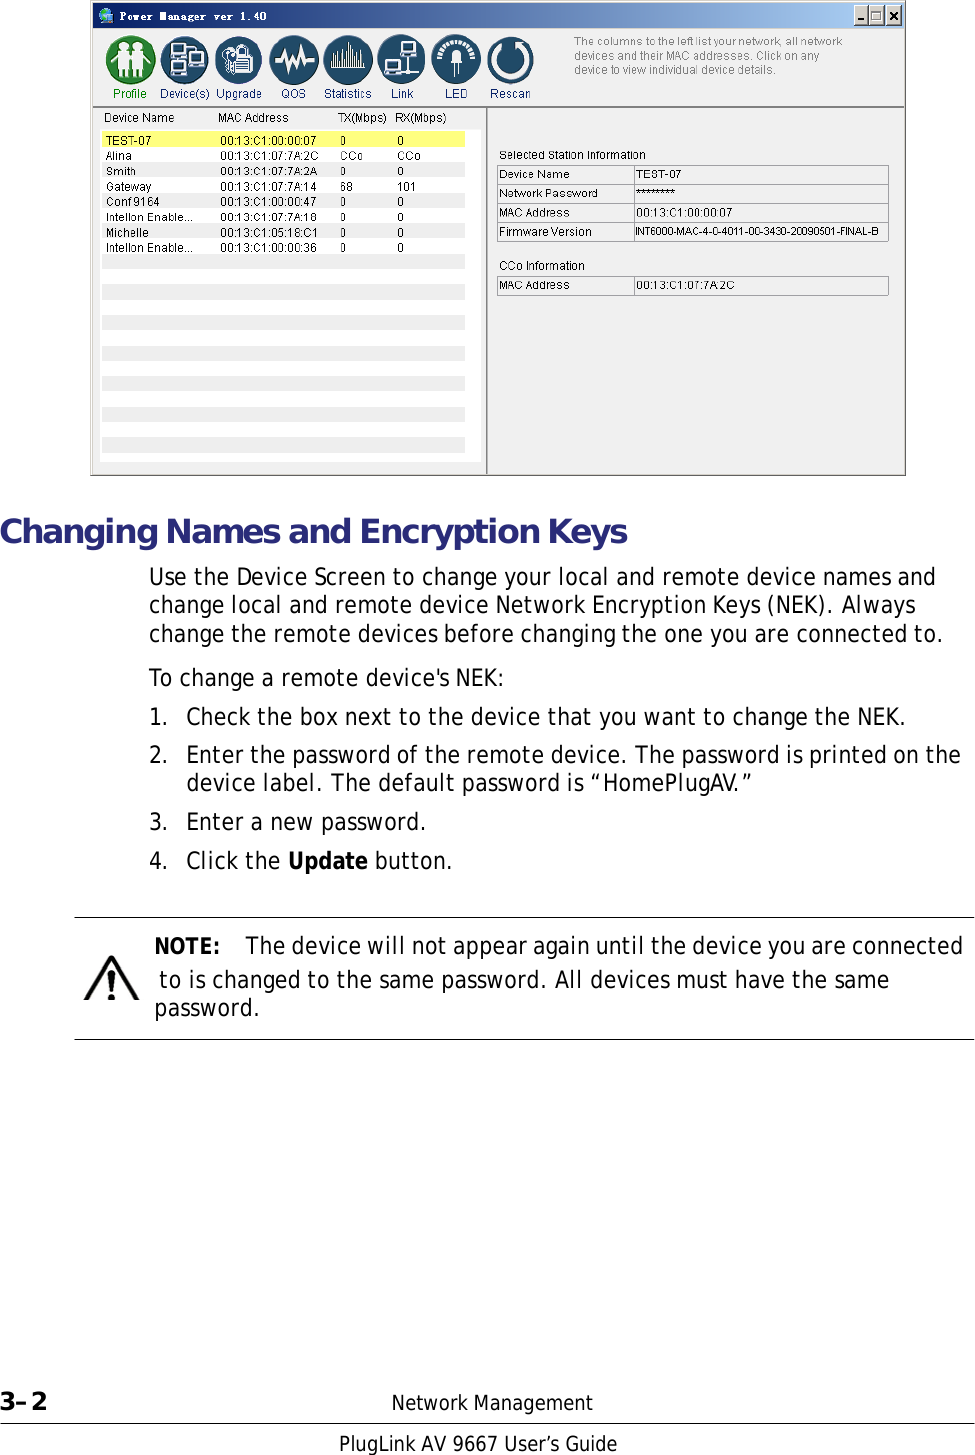                         Changing Names and Encryption Keys  Use the Device Screen to change your local and remote device names and change local and remote device Network Encryption Keys (NEK). Always change the remote devices before changing the one you are connected to.  To change a remote device&apos;s NEK:  1.  Check the box next to the device that you want to change the NEK.  2.  Enter the password of the remote device. The password is printed on the device label. The default password is “HomePlugAV.”  3.  Enter a new password.  4.  Click the Update button.     NOTE:  The device will not appear again until the device you are connected   to is changed to the same password. All devices must have the same password.                  3–2  Network Management  PlugLink AV 9667 User’s Guide 